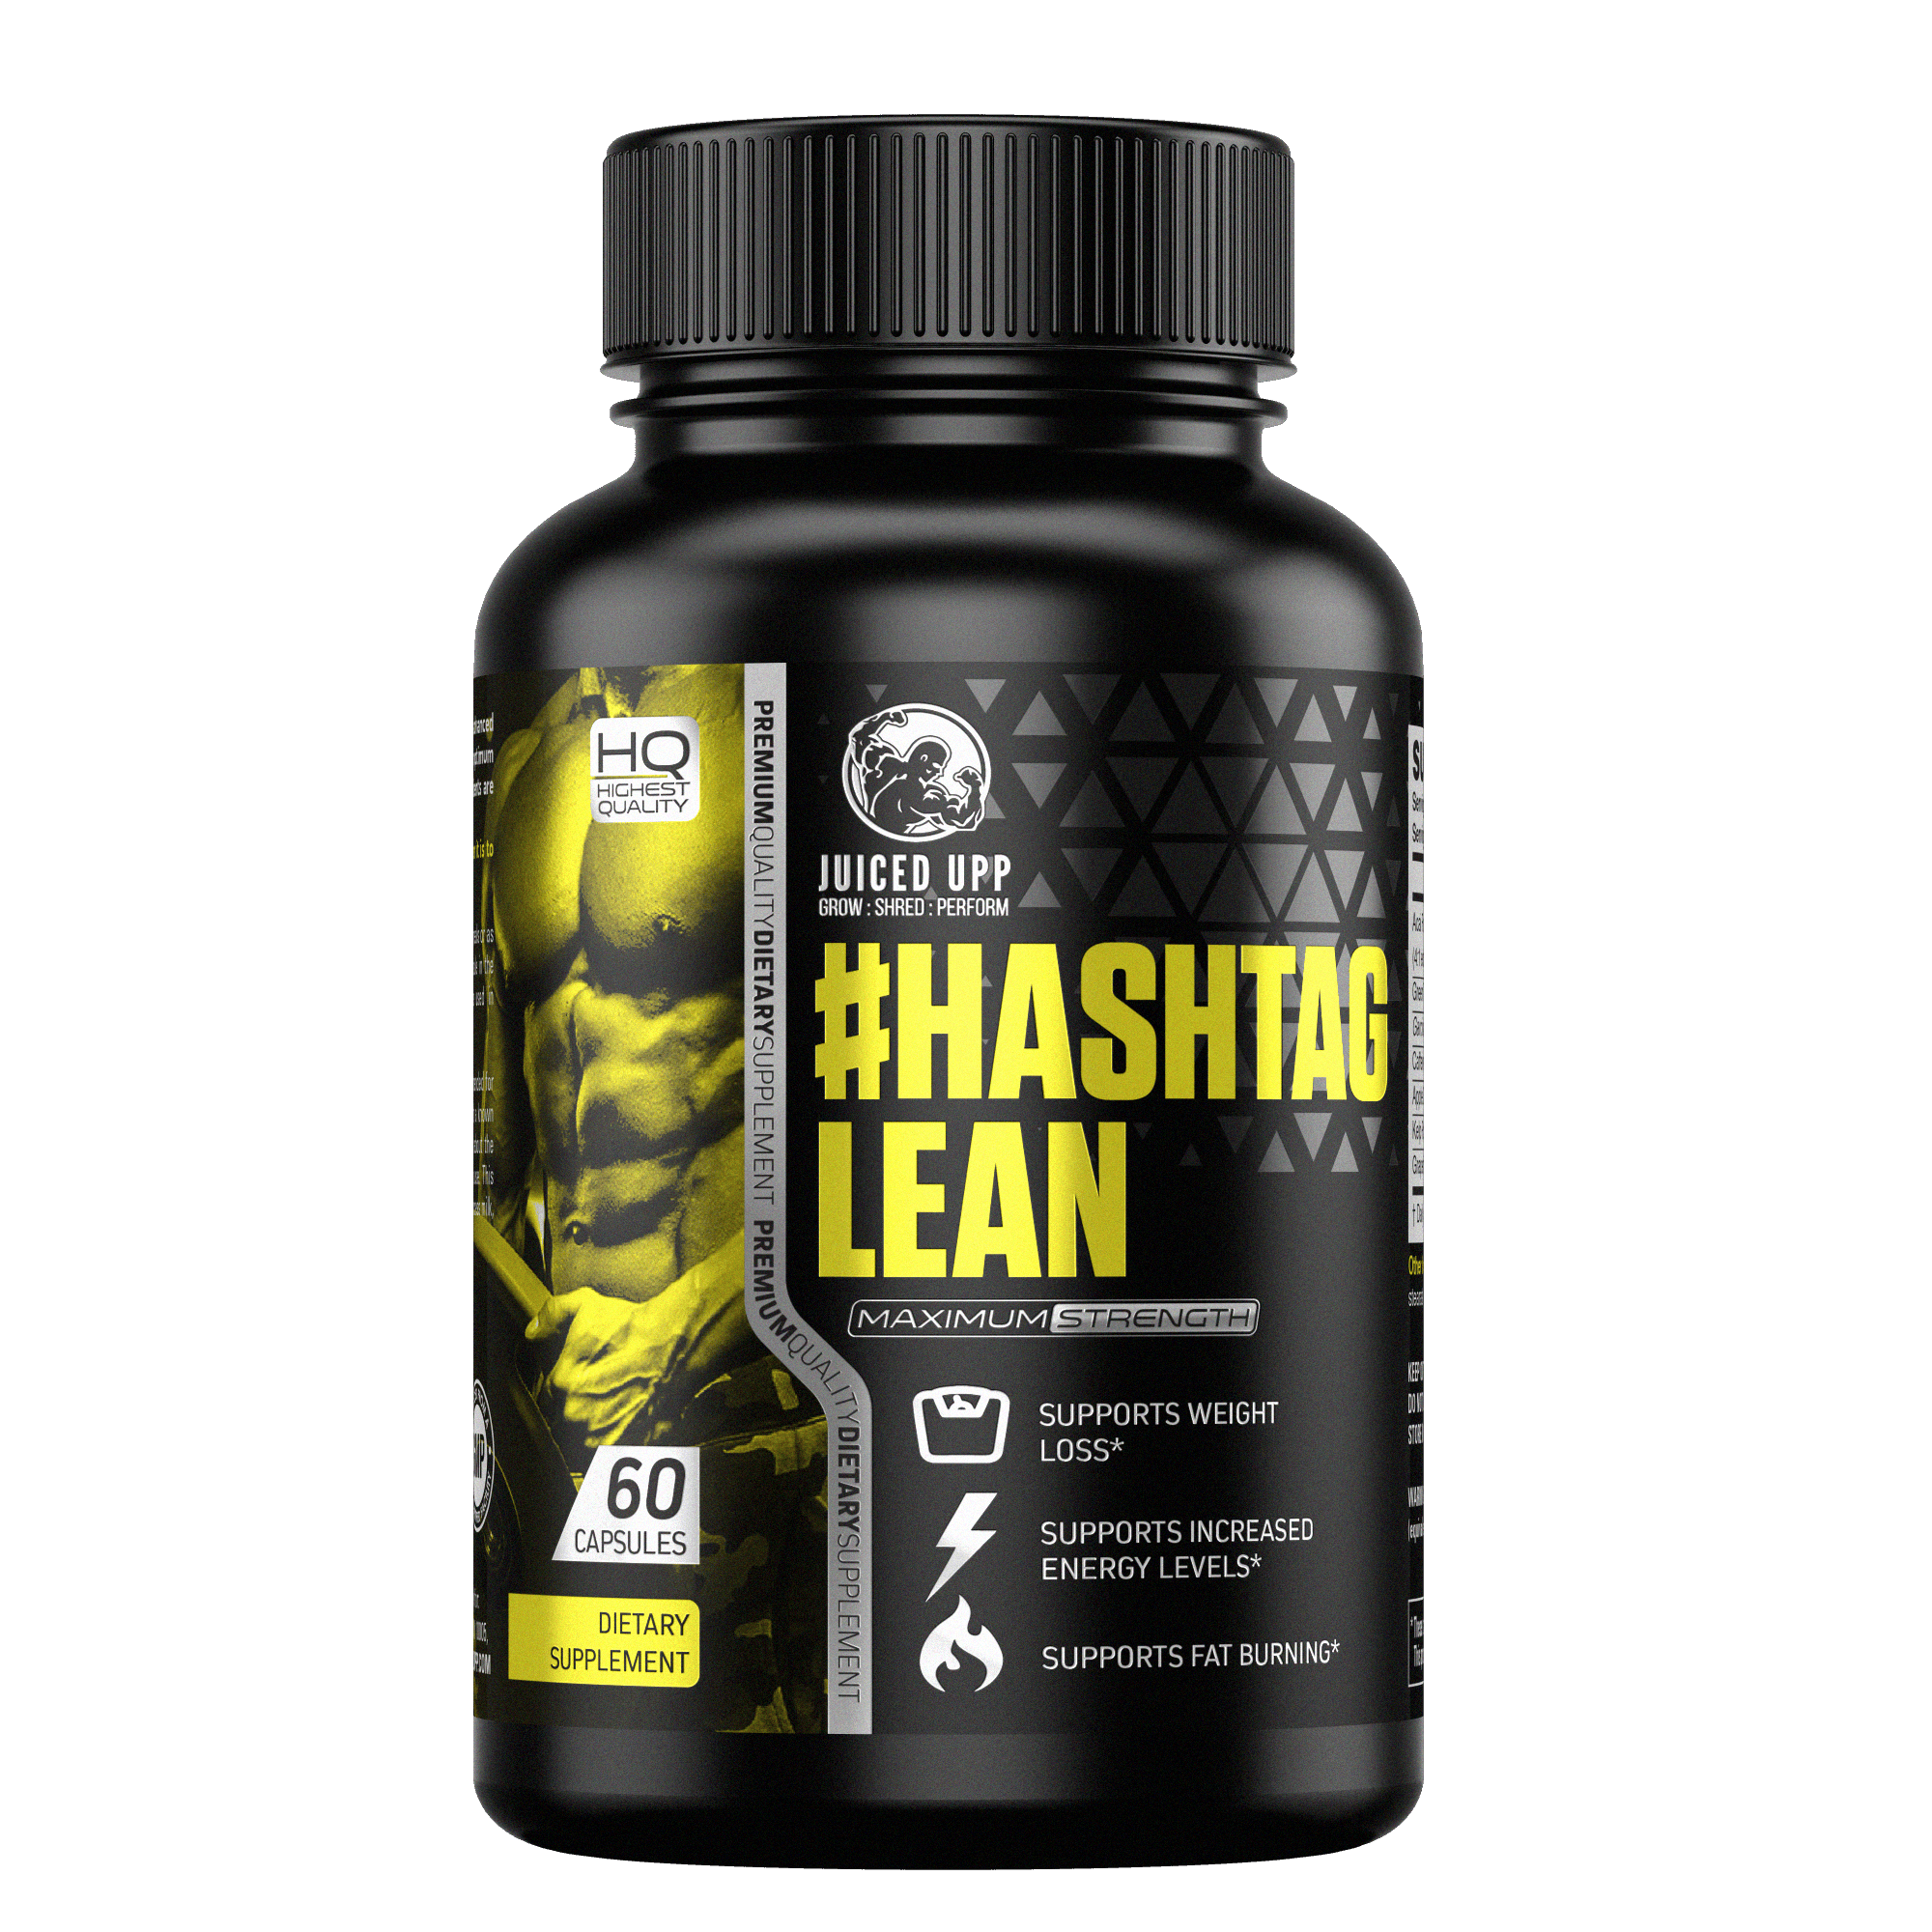 HASHTAG LEAN - Juiced Upp - 100% Natural Fitness and Wellbeing Supplements